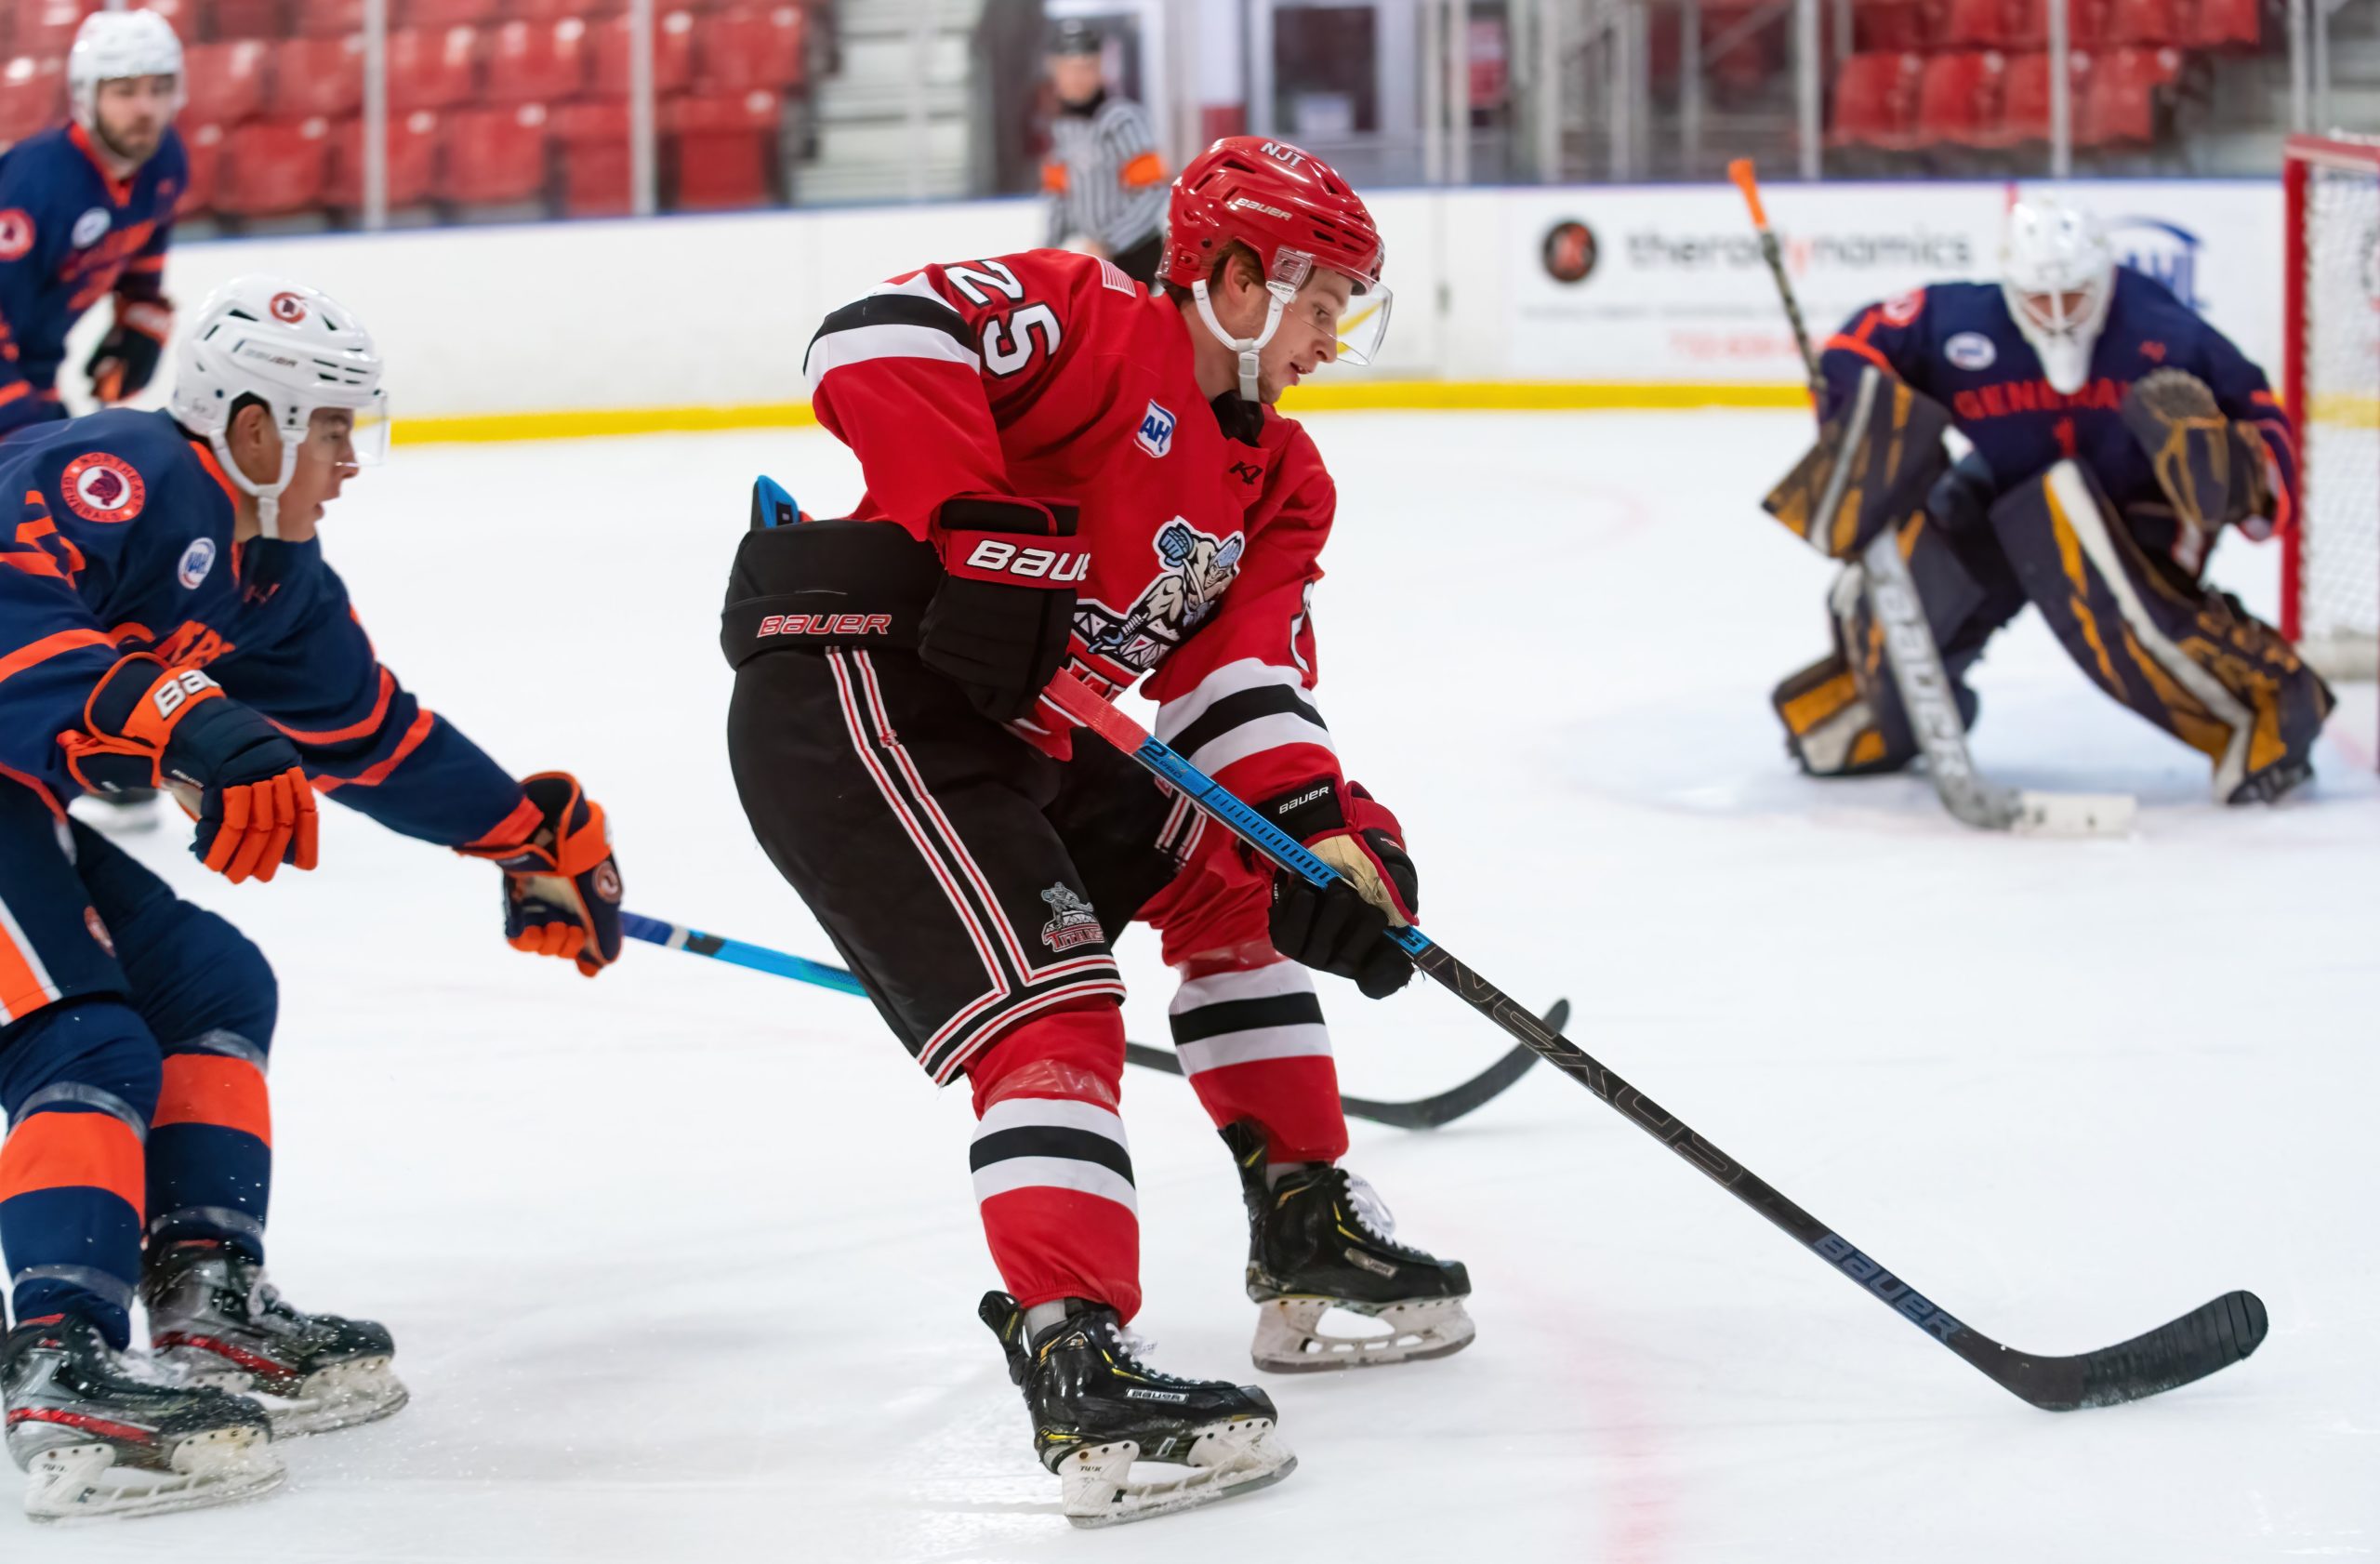 Titans fall to Generals 6 – 3 to split weekend series